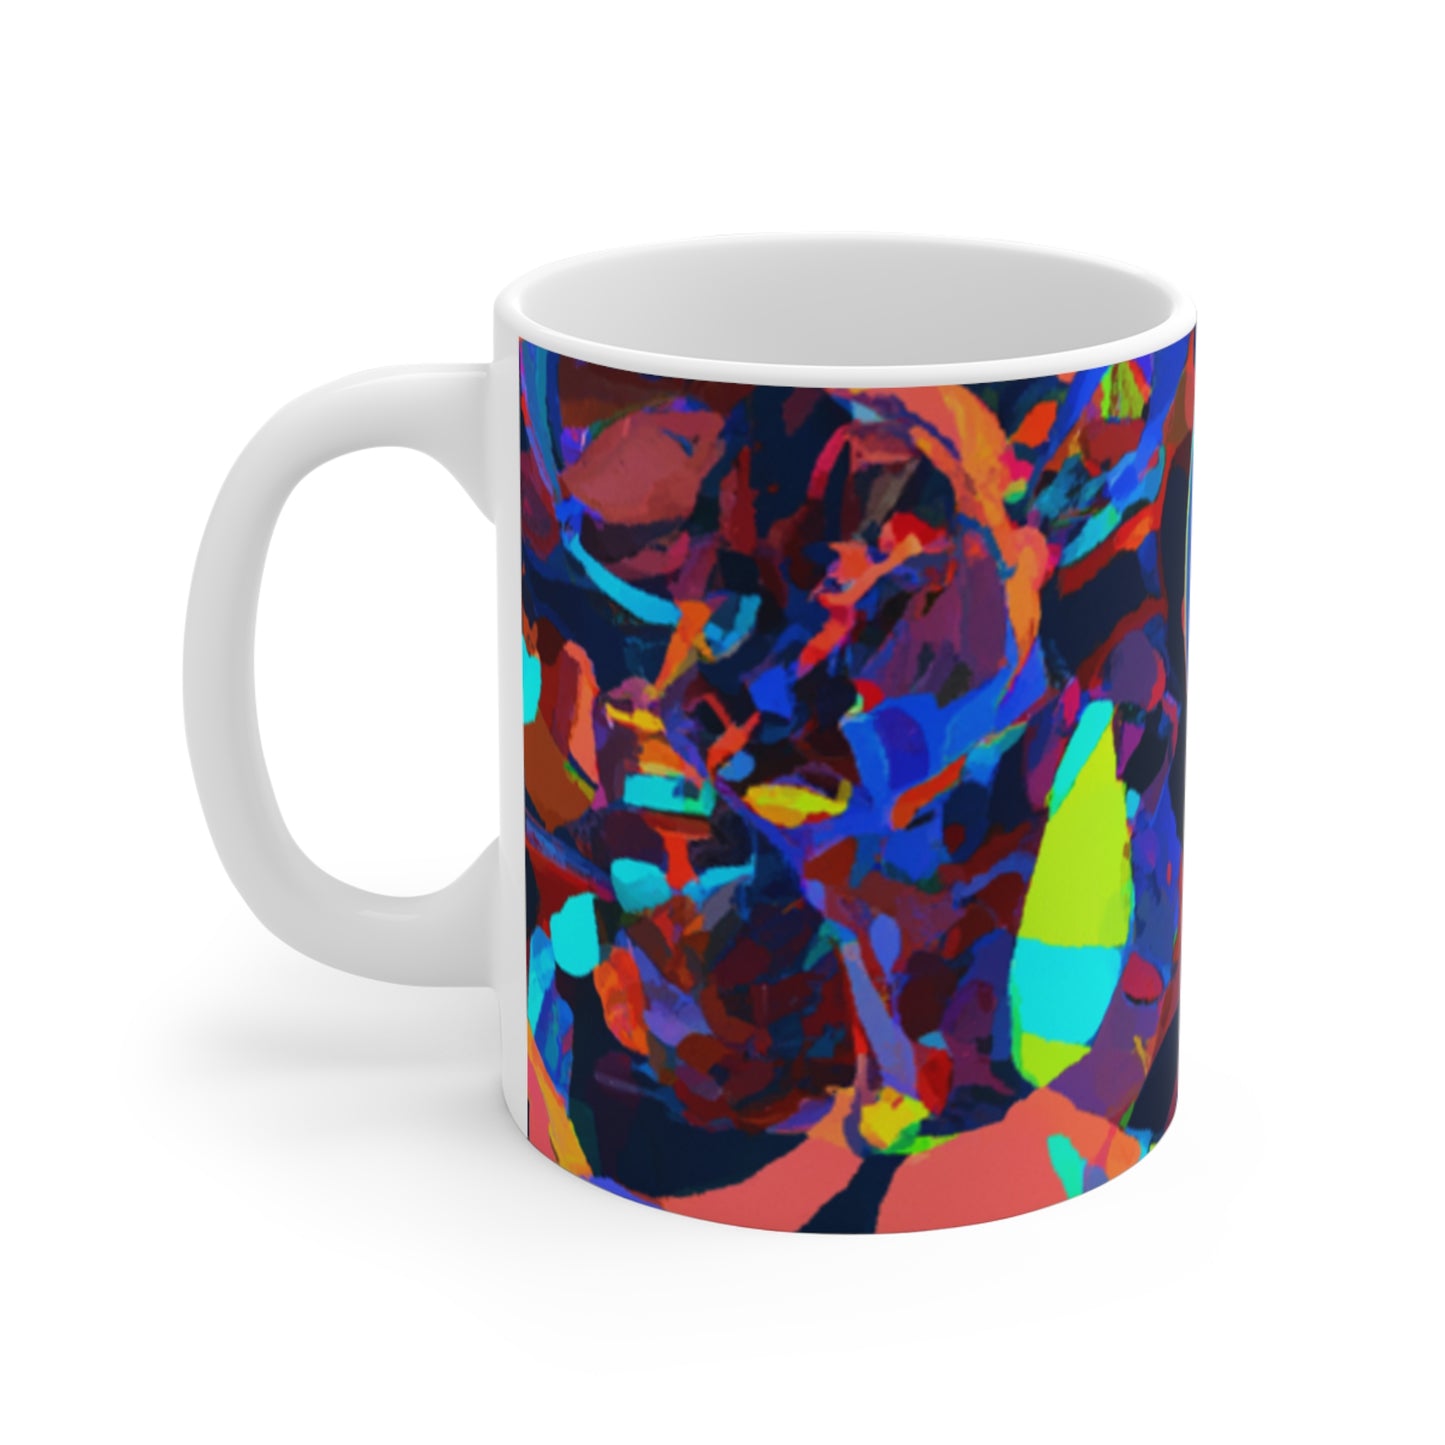 Oliver's Java Roast - Psychedelic Coffee Cup Mug 11 Ounce